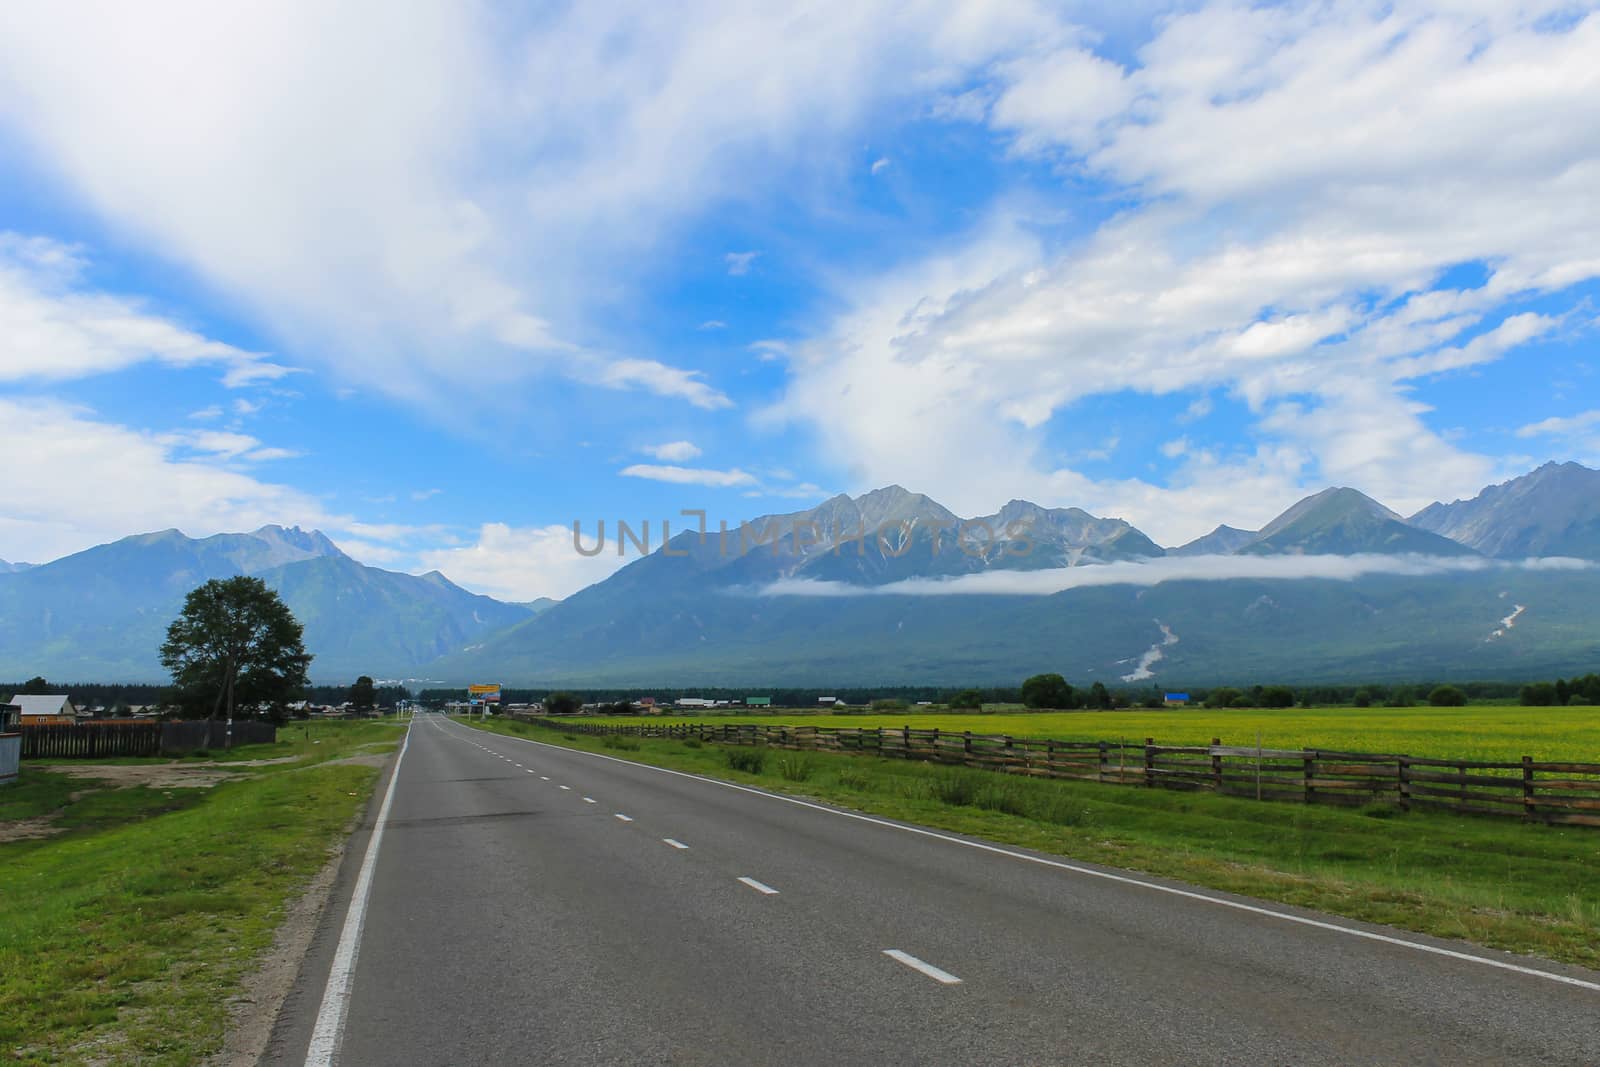 The road leading to the foot of the mountains past the green field by Skaron